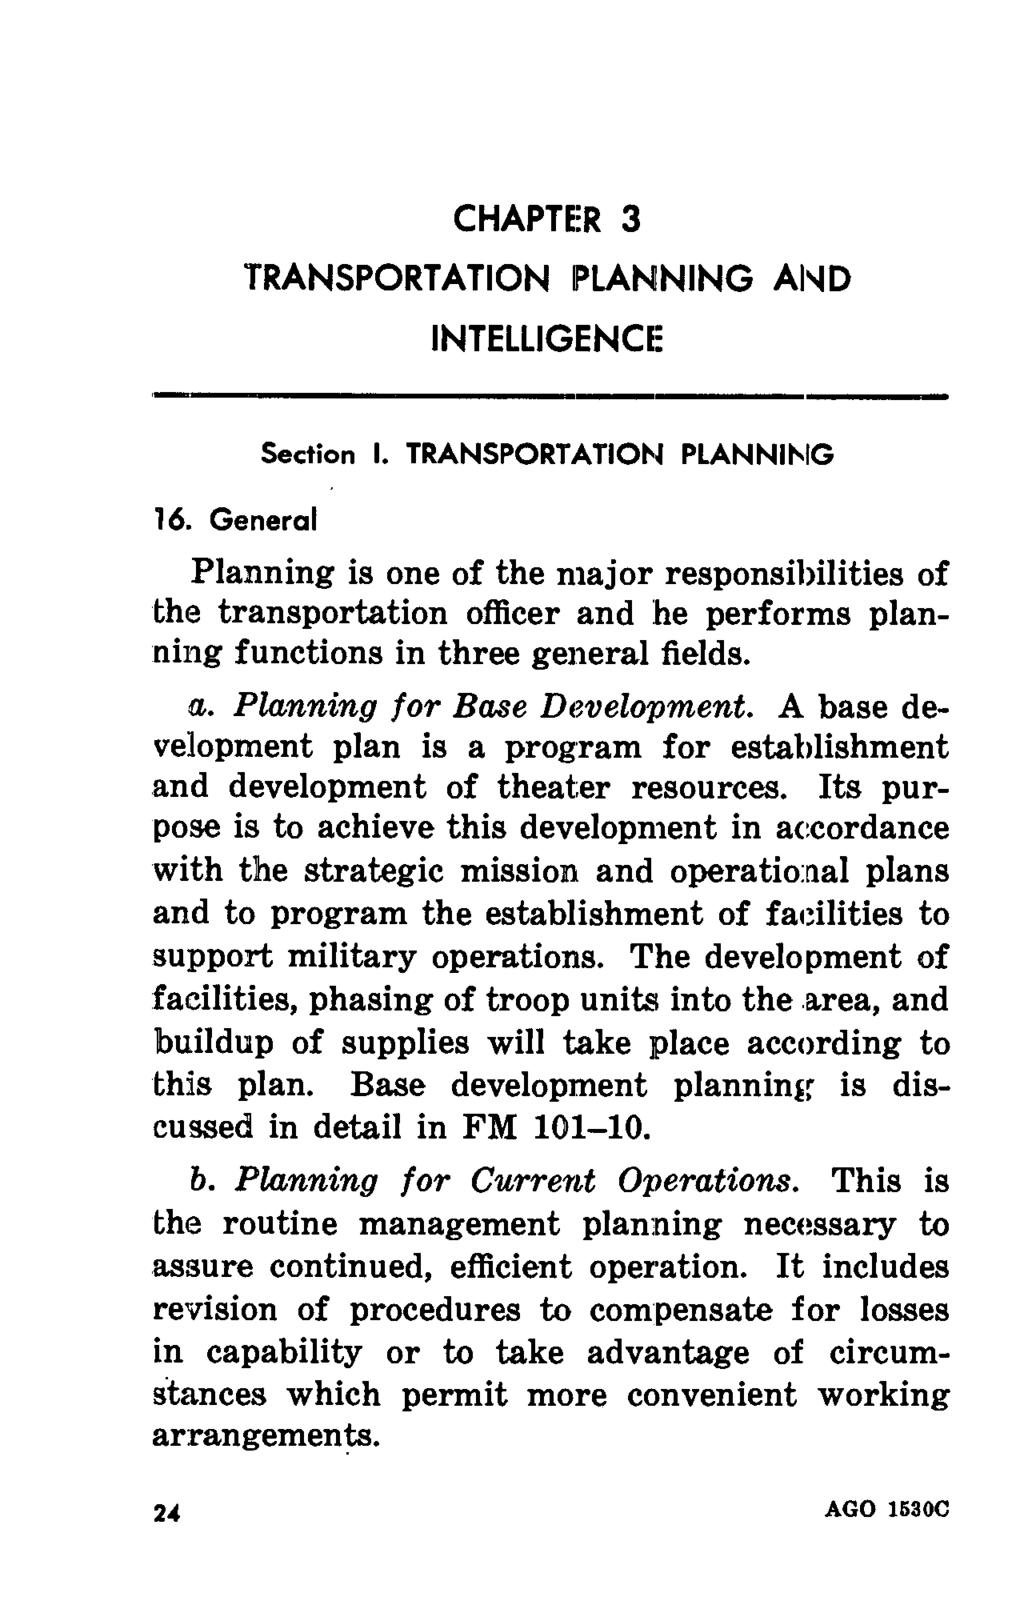 CHAPTER 3 TRANSPORTATION PLANNING AND INTELLIGENCE 16. General Section I.